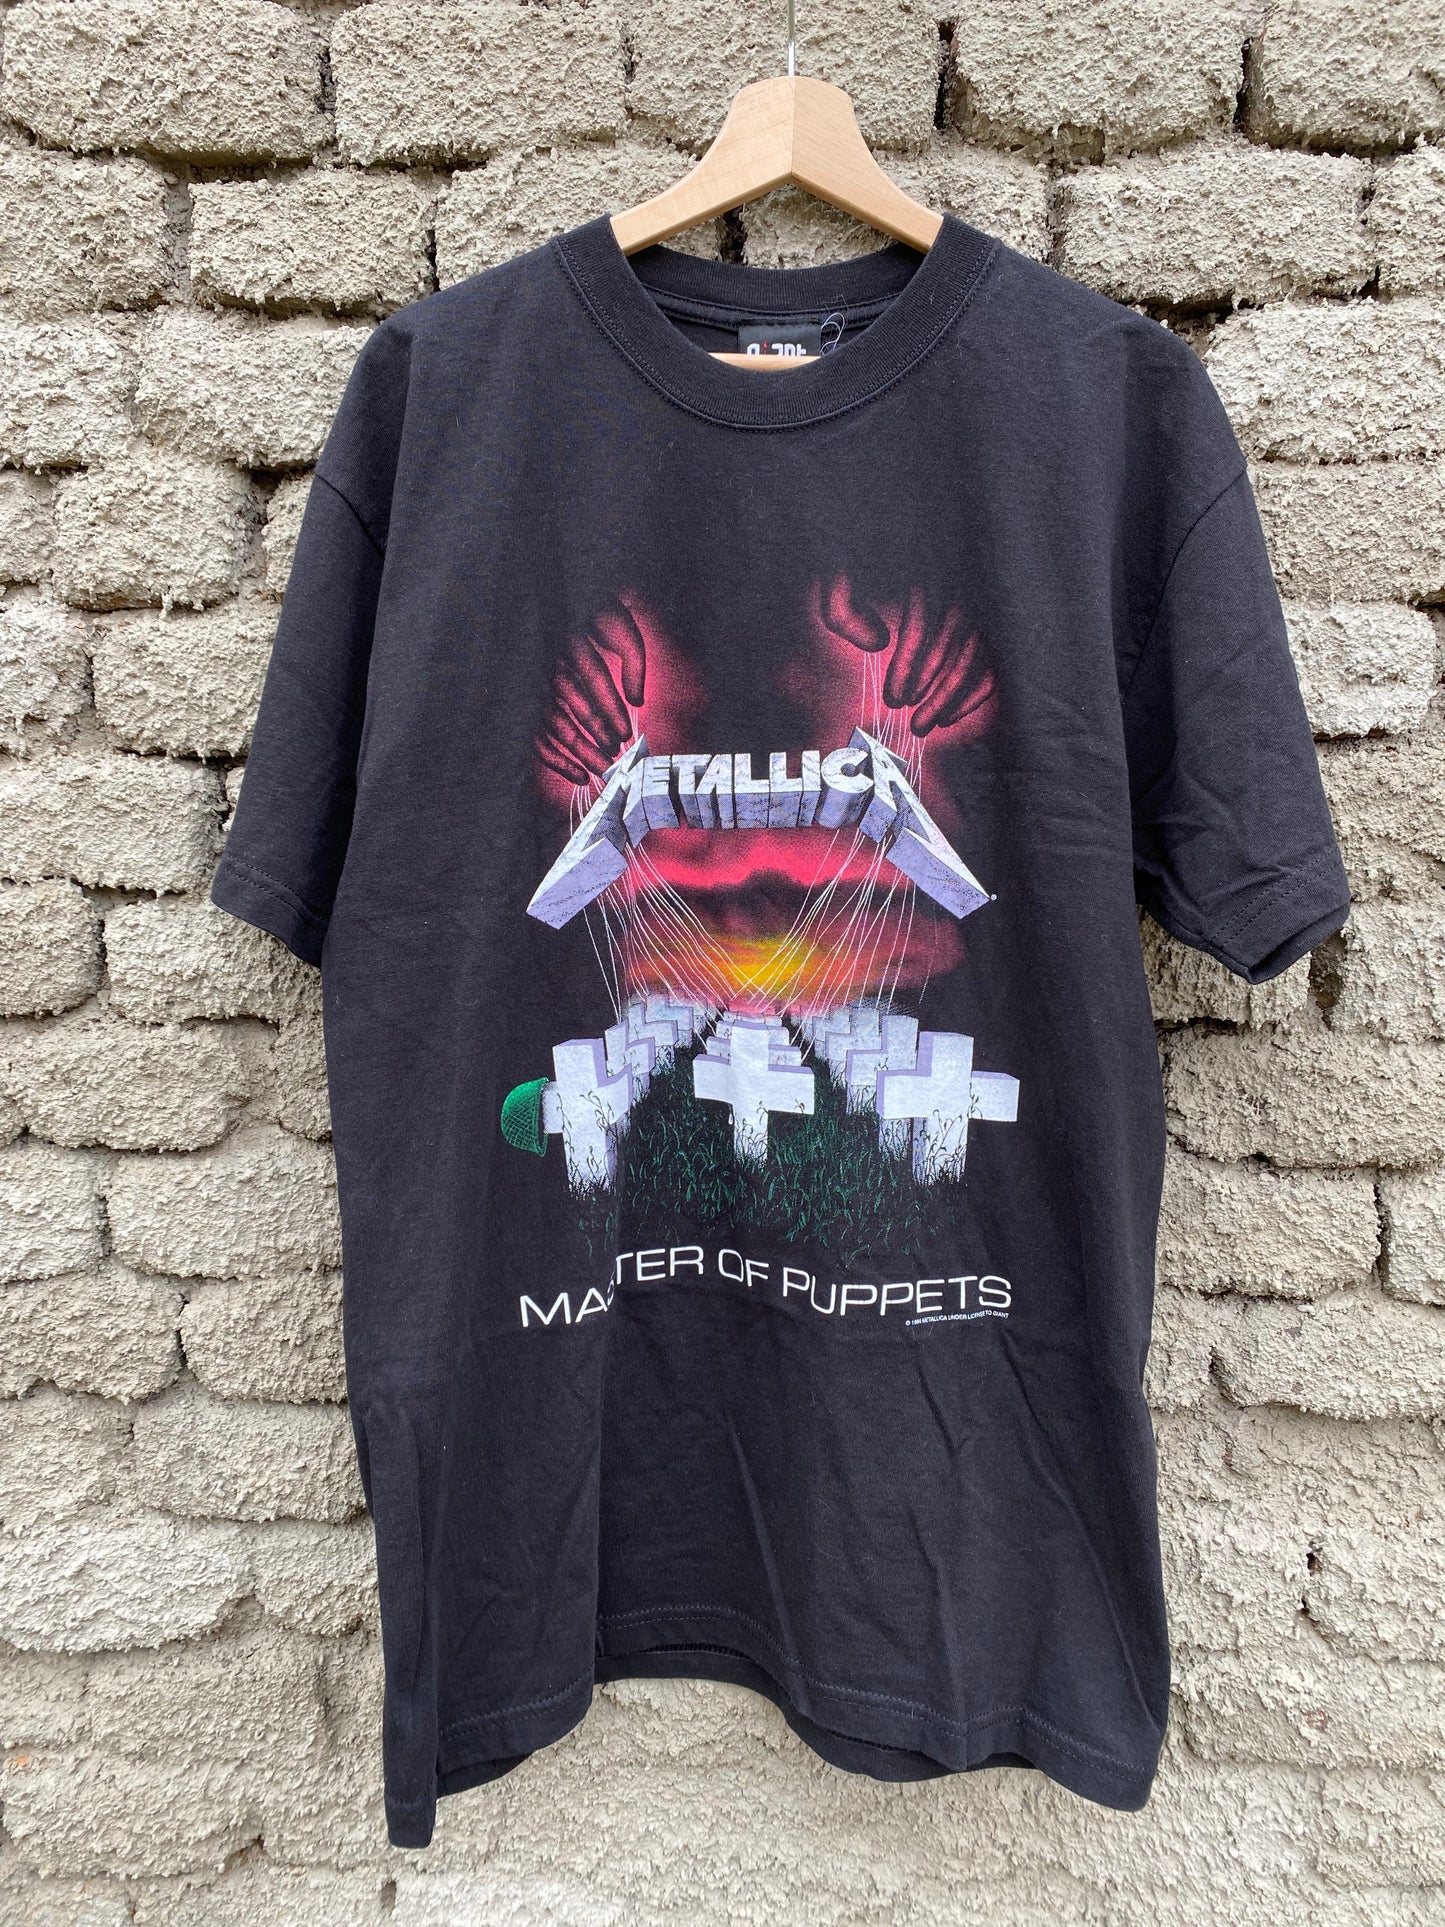 Vintage Metallica "Master of Puppets" 1994 - t-shirt - size XL